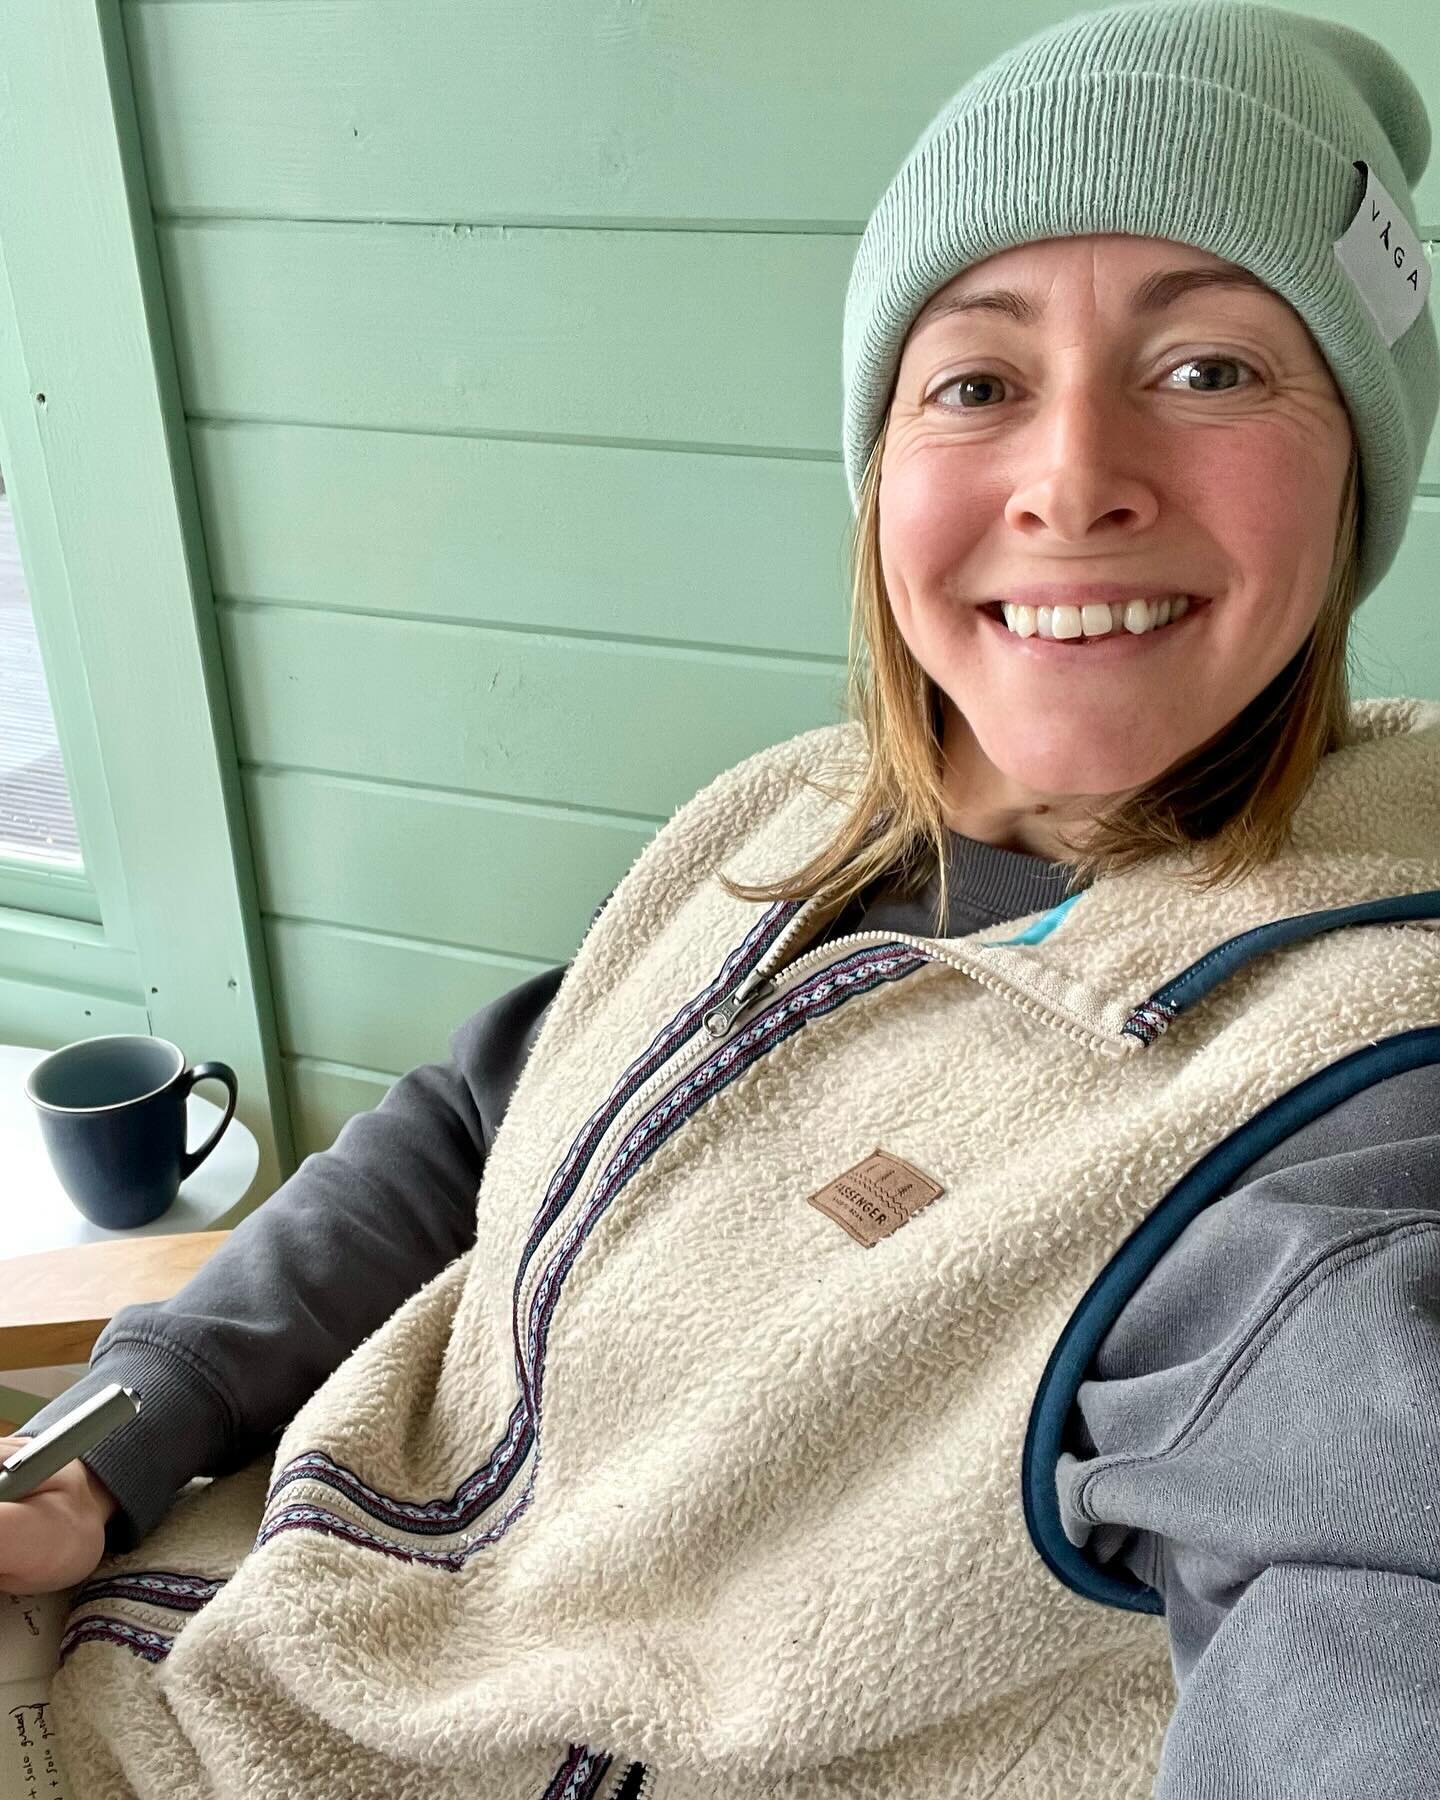 Staying cosy in the cabin 🥹 Just finished all my client sessions for the week (@littlewoodjenna treating me to a spa day tomorrow! 😌) and now writing up my notes, whilst listening to the rain pitter patter outside 📝🌧️

Really proud of my clients 